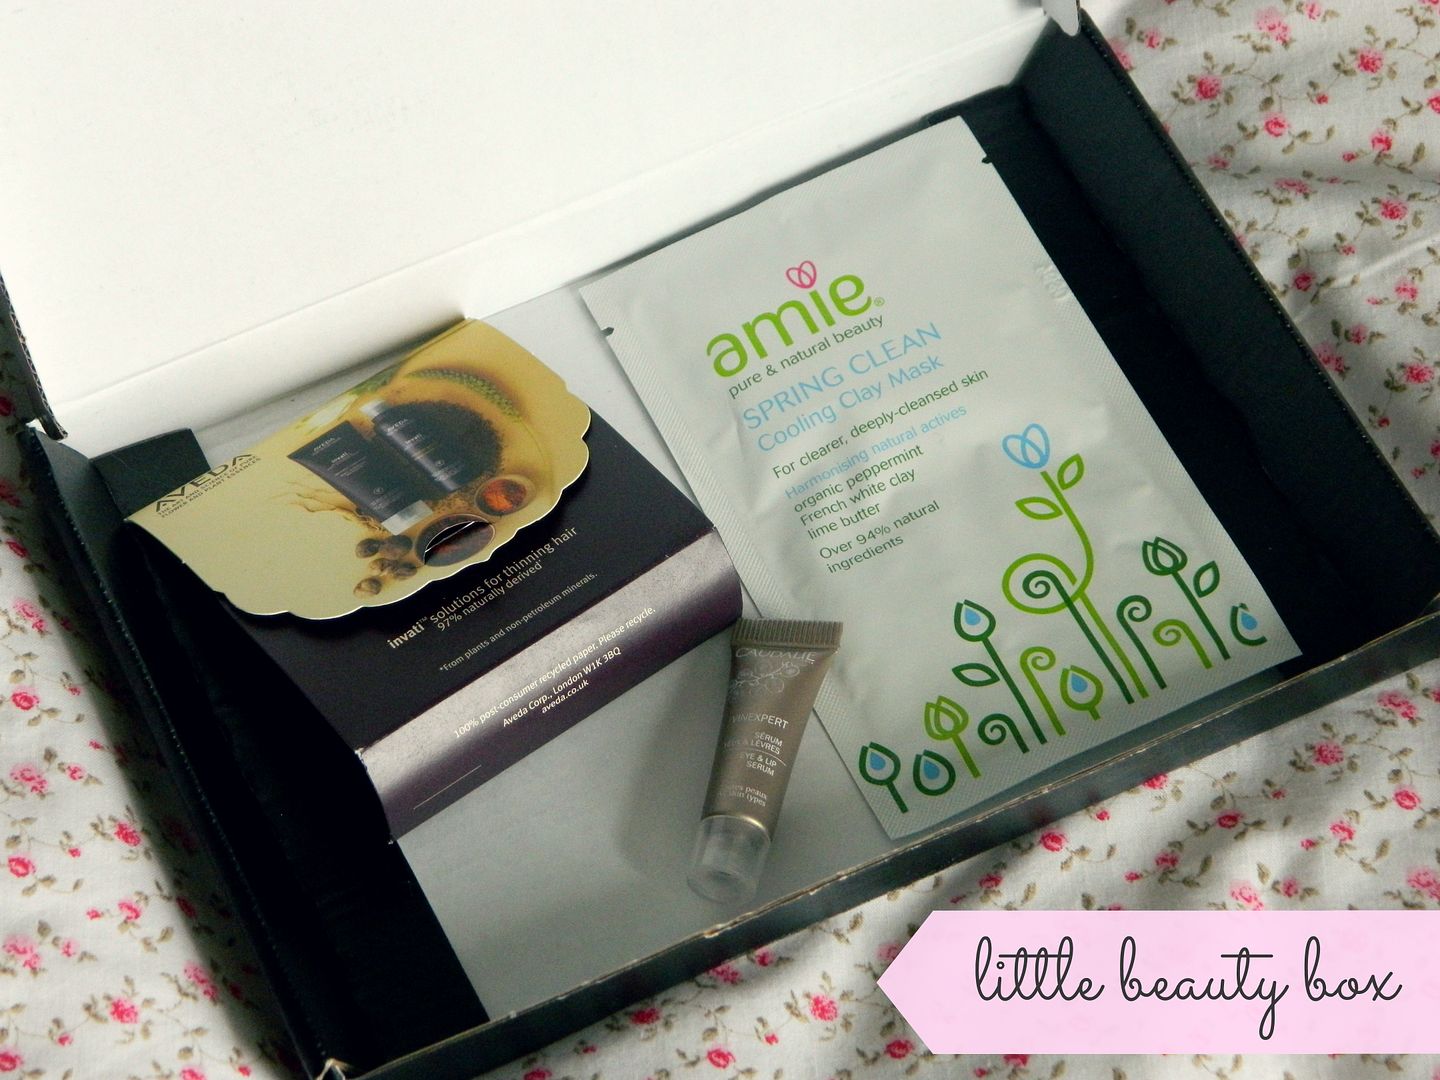 Latest In Beauty Little Beauty Box June Contents Caudalie Amie Aveda Review Belle-amie